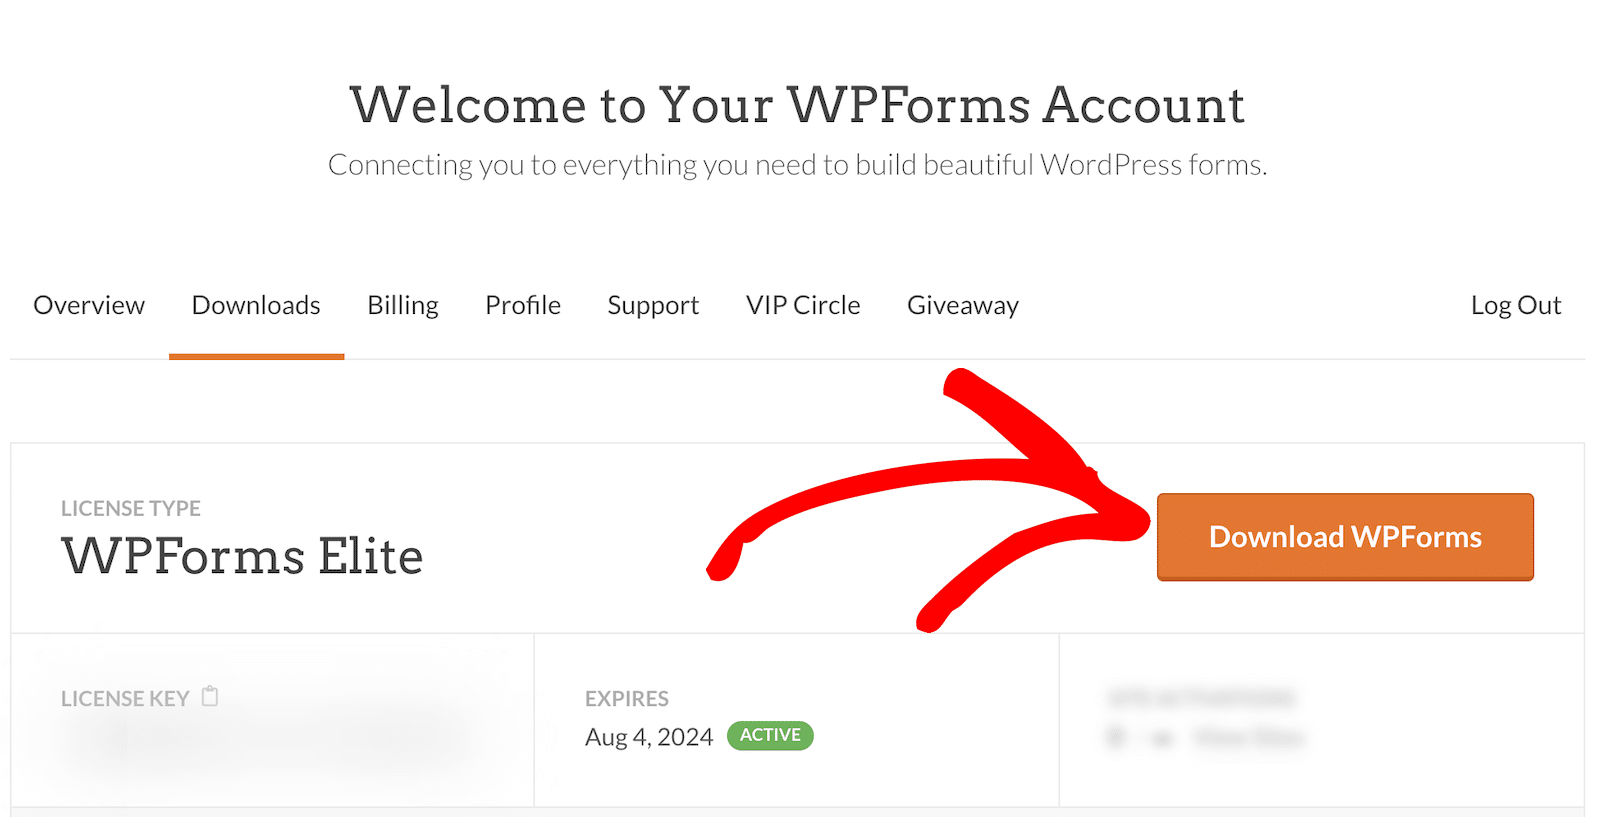 Download WPForms from your account page.